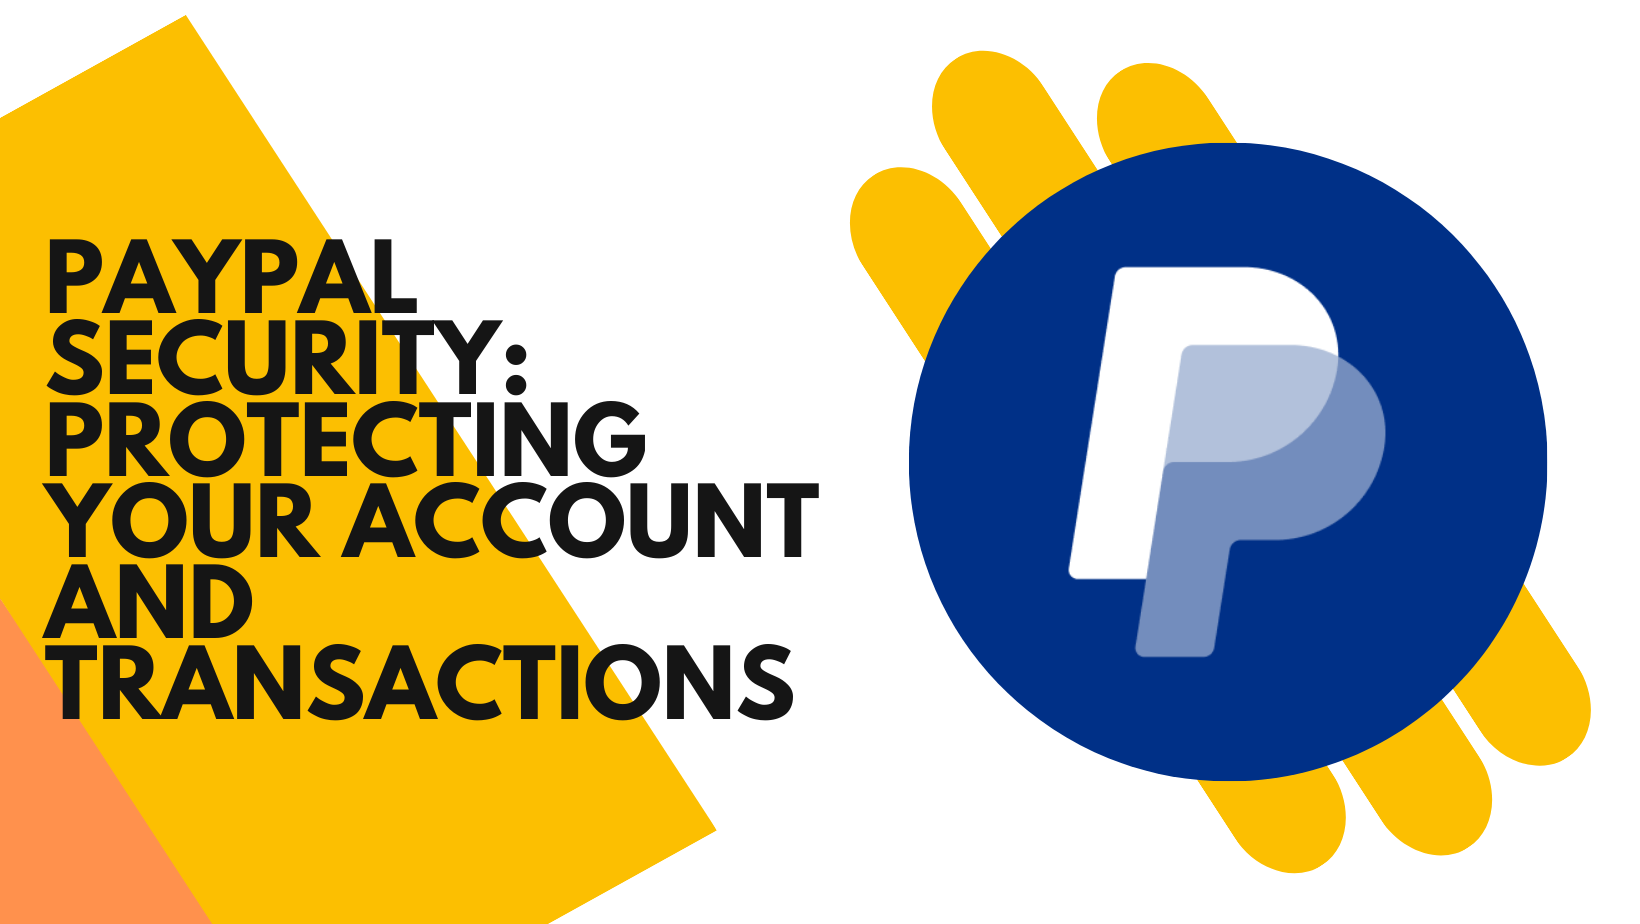 PayPal Security: Protecting Your Account and Transactions